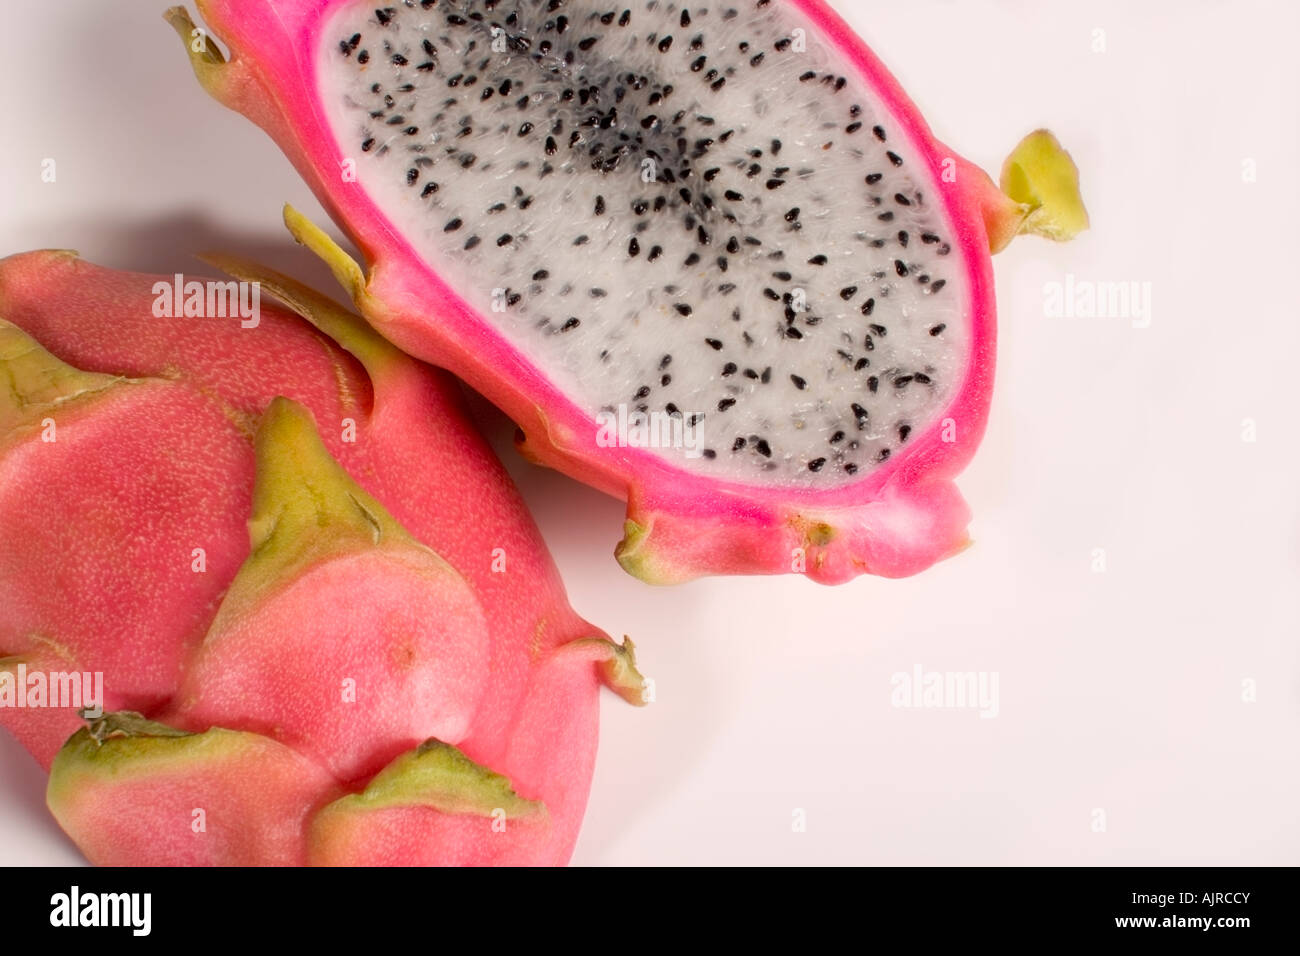 Ripe dragon fruit, hylocereus undatus, cut in half to show the white flesh and seeds Stock Photo